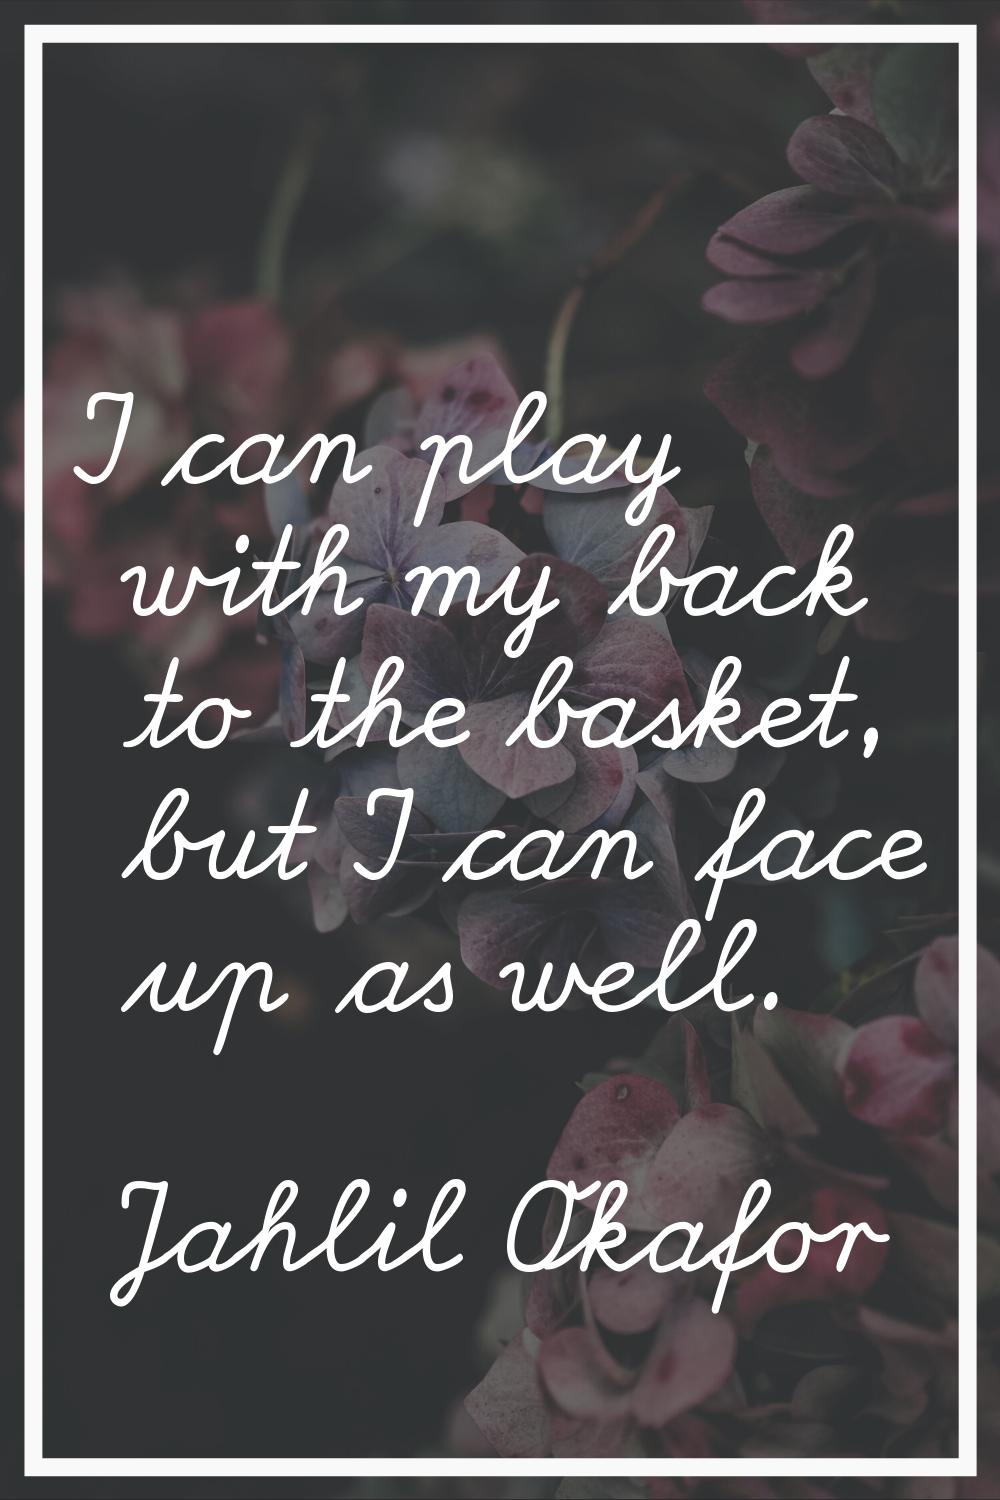 I can play with my back to the basket, but I can face up as well.